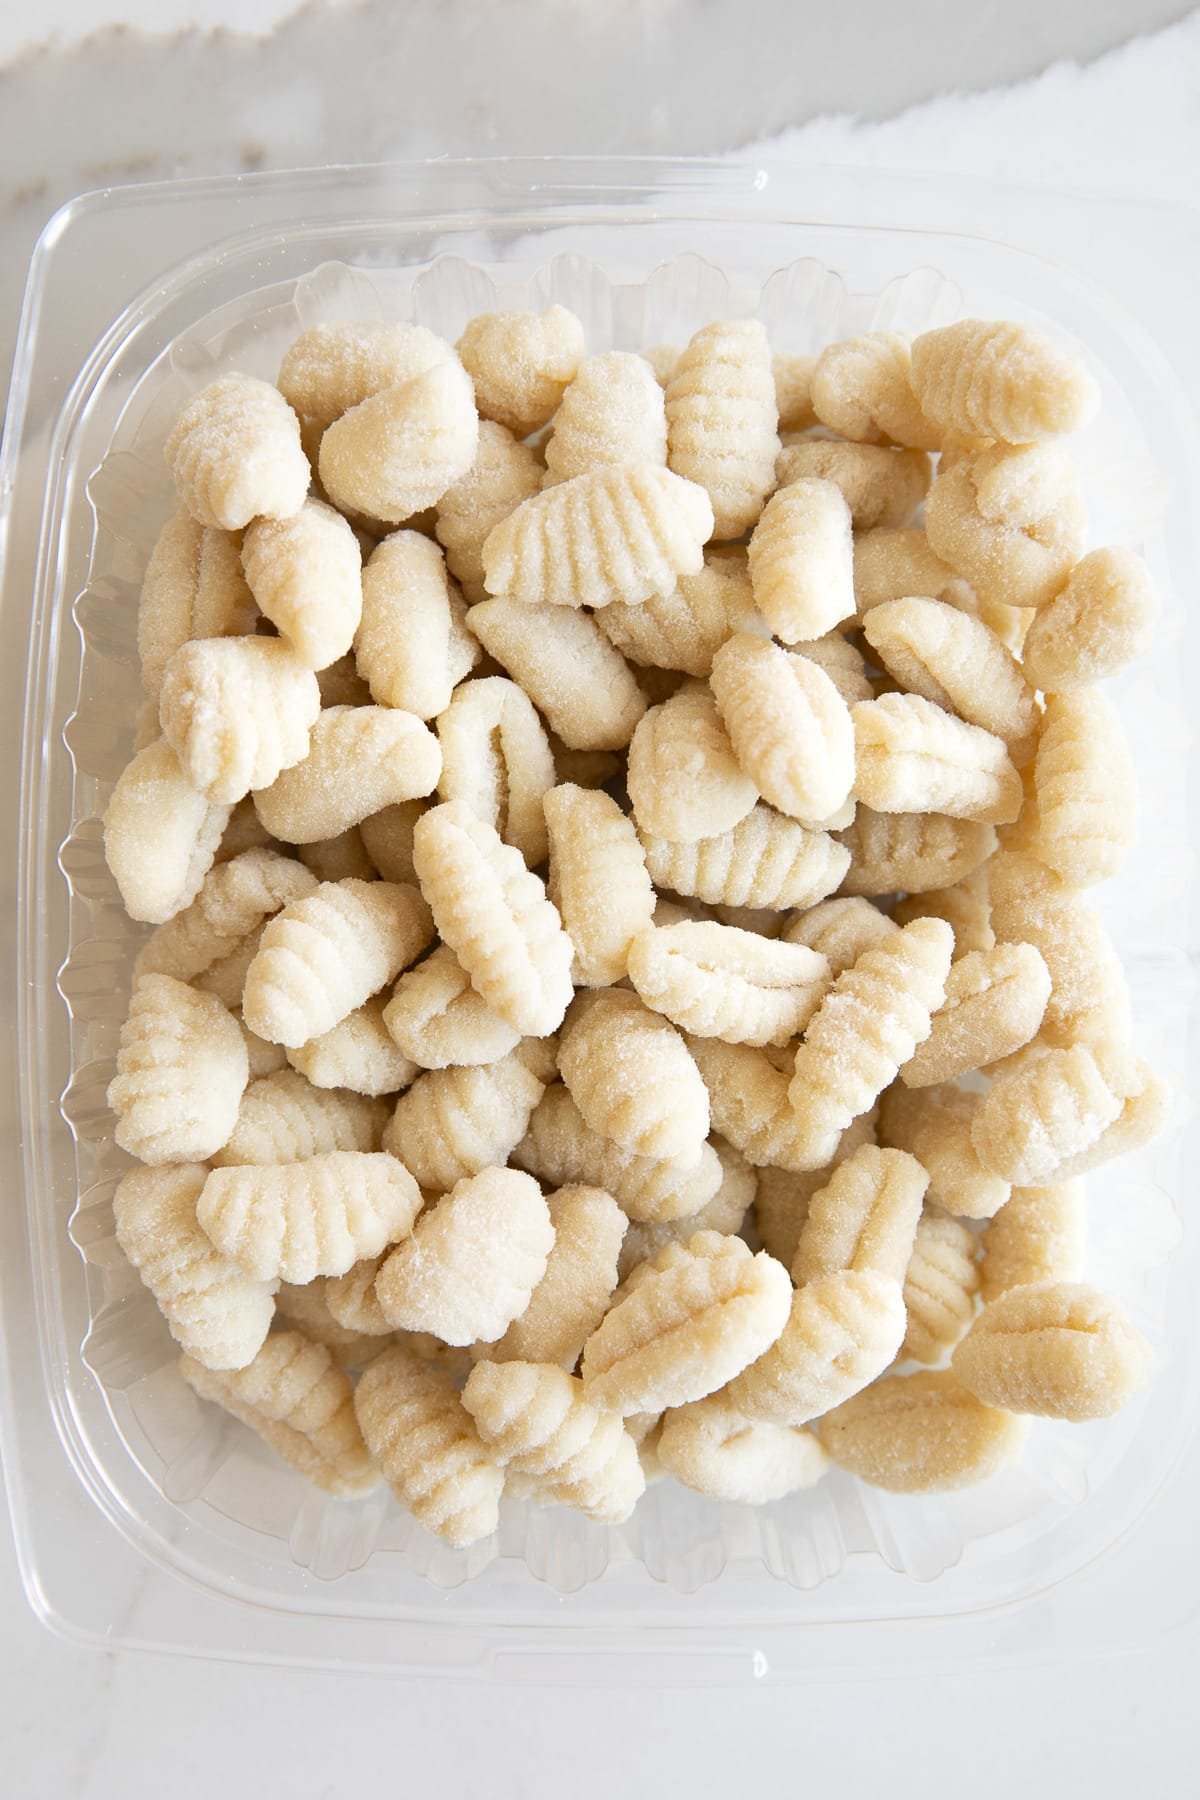 Plastic package filled with pre-made potato gnocchi.